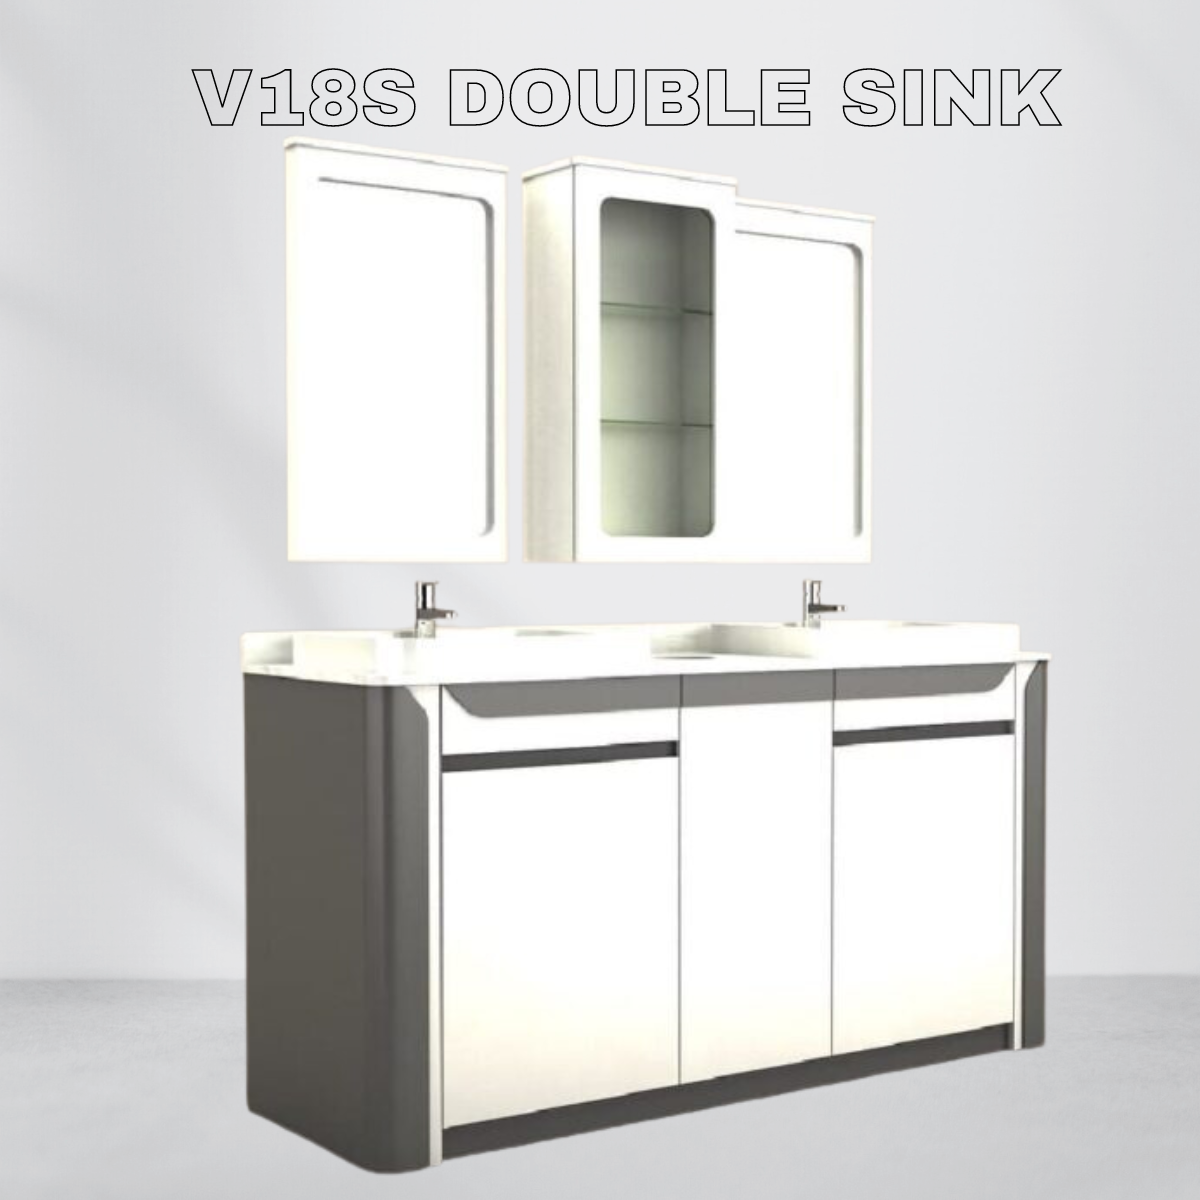 v18s-double-sink